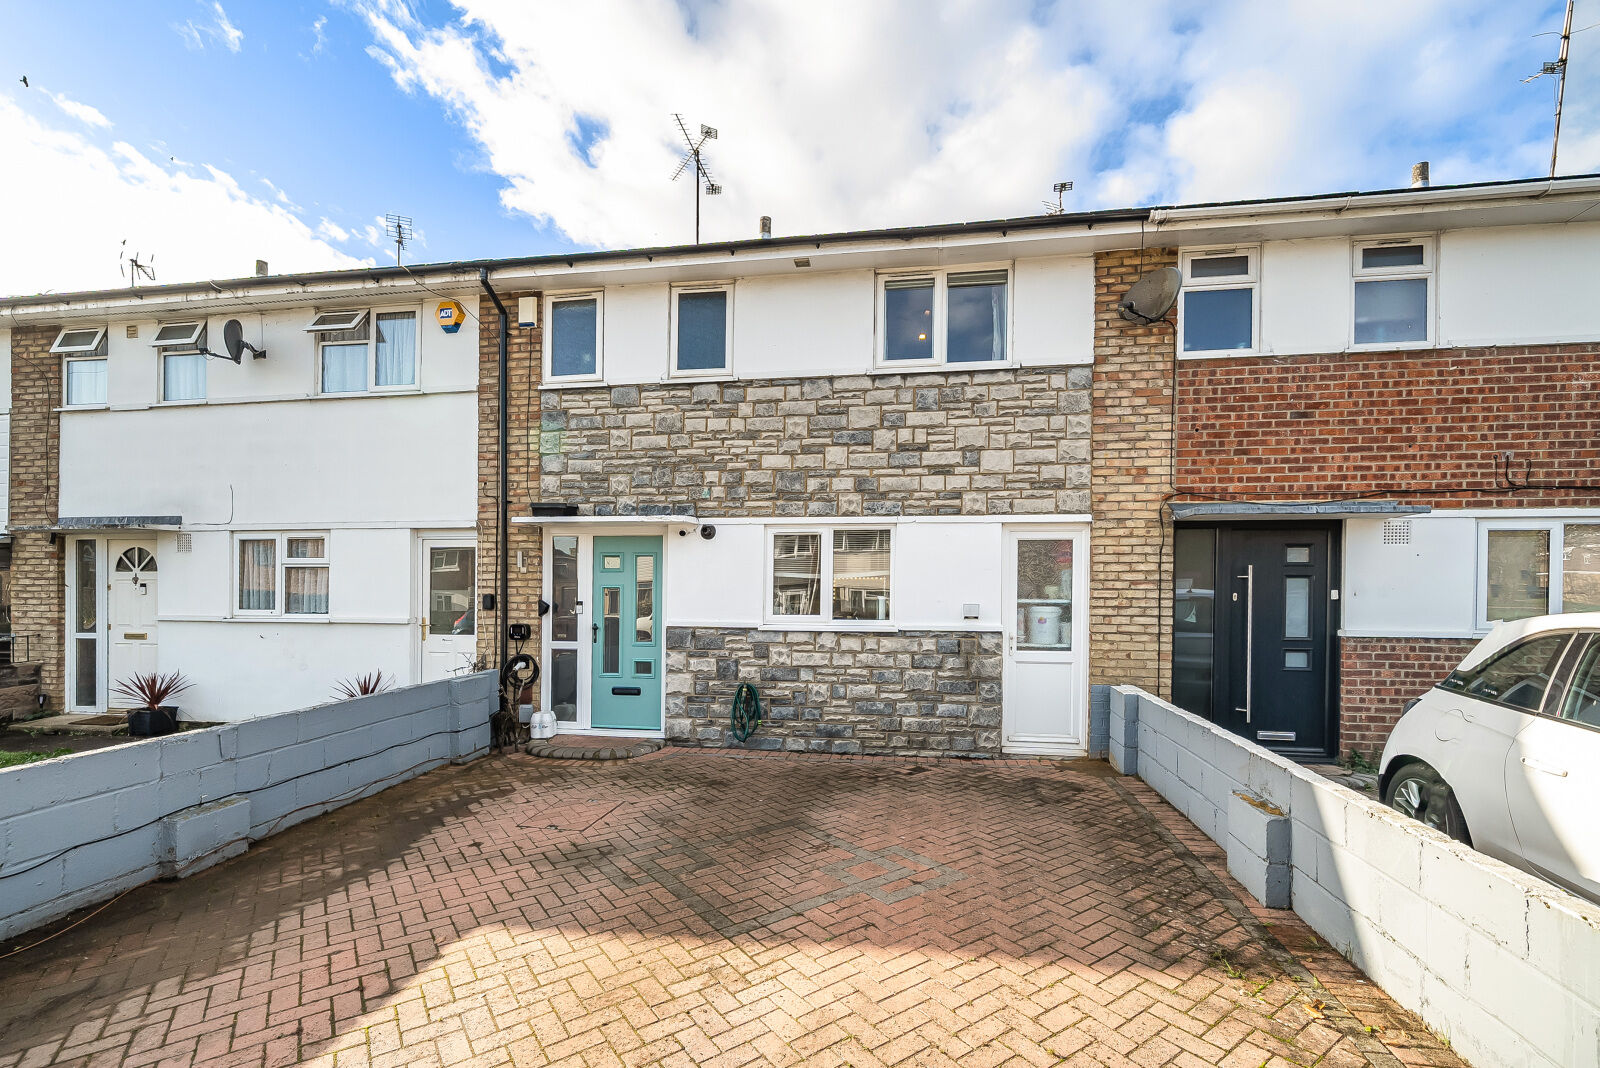 3 bedroom mid terraced house for sale Appleford Road, Reading, RG30, main image